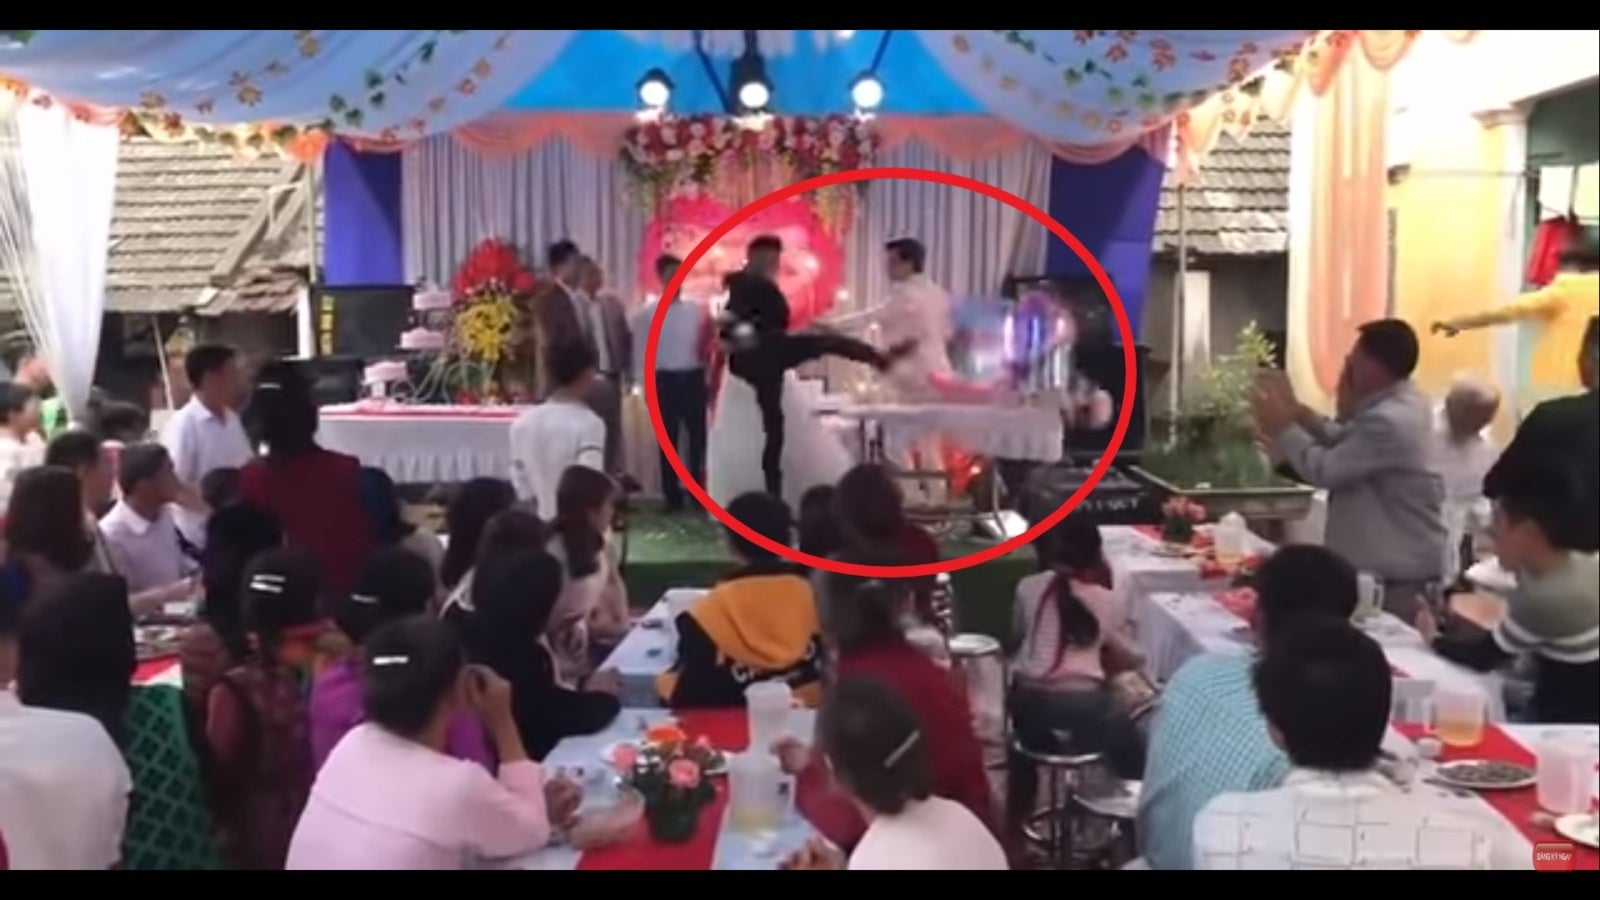 Watch: Groom Shockingly Ruins Wedding By Kicking Champagne, Turns Out The True Culprit Is Someone Else! - WORLD OF BUZZ